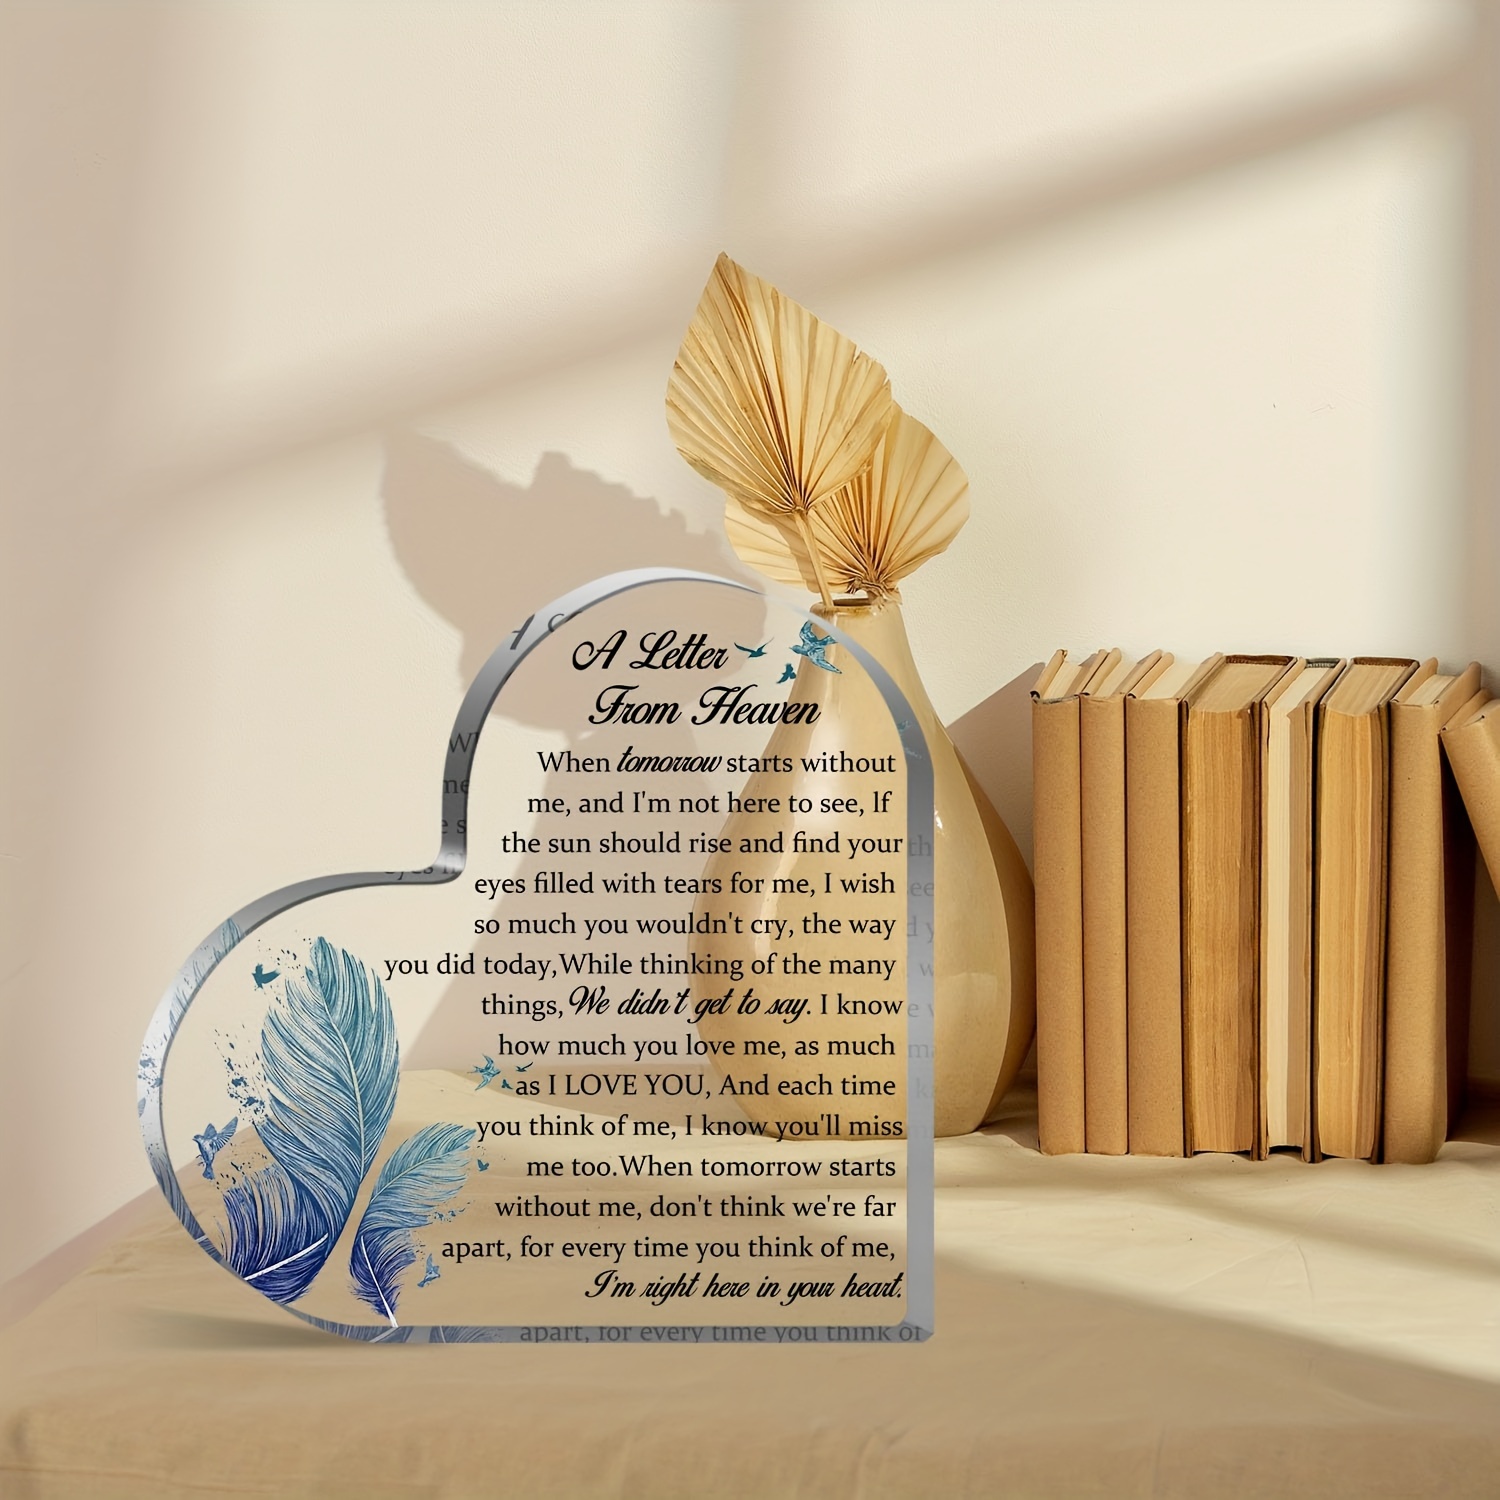 Loss of Mother Gift, Sympathy Gift, Mother Memorial Gift, Keepsake